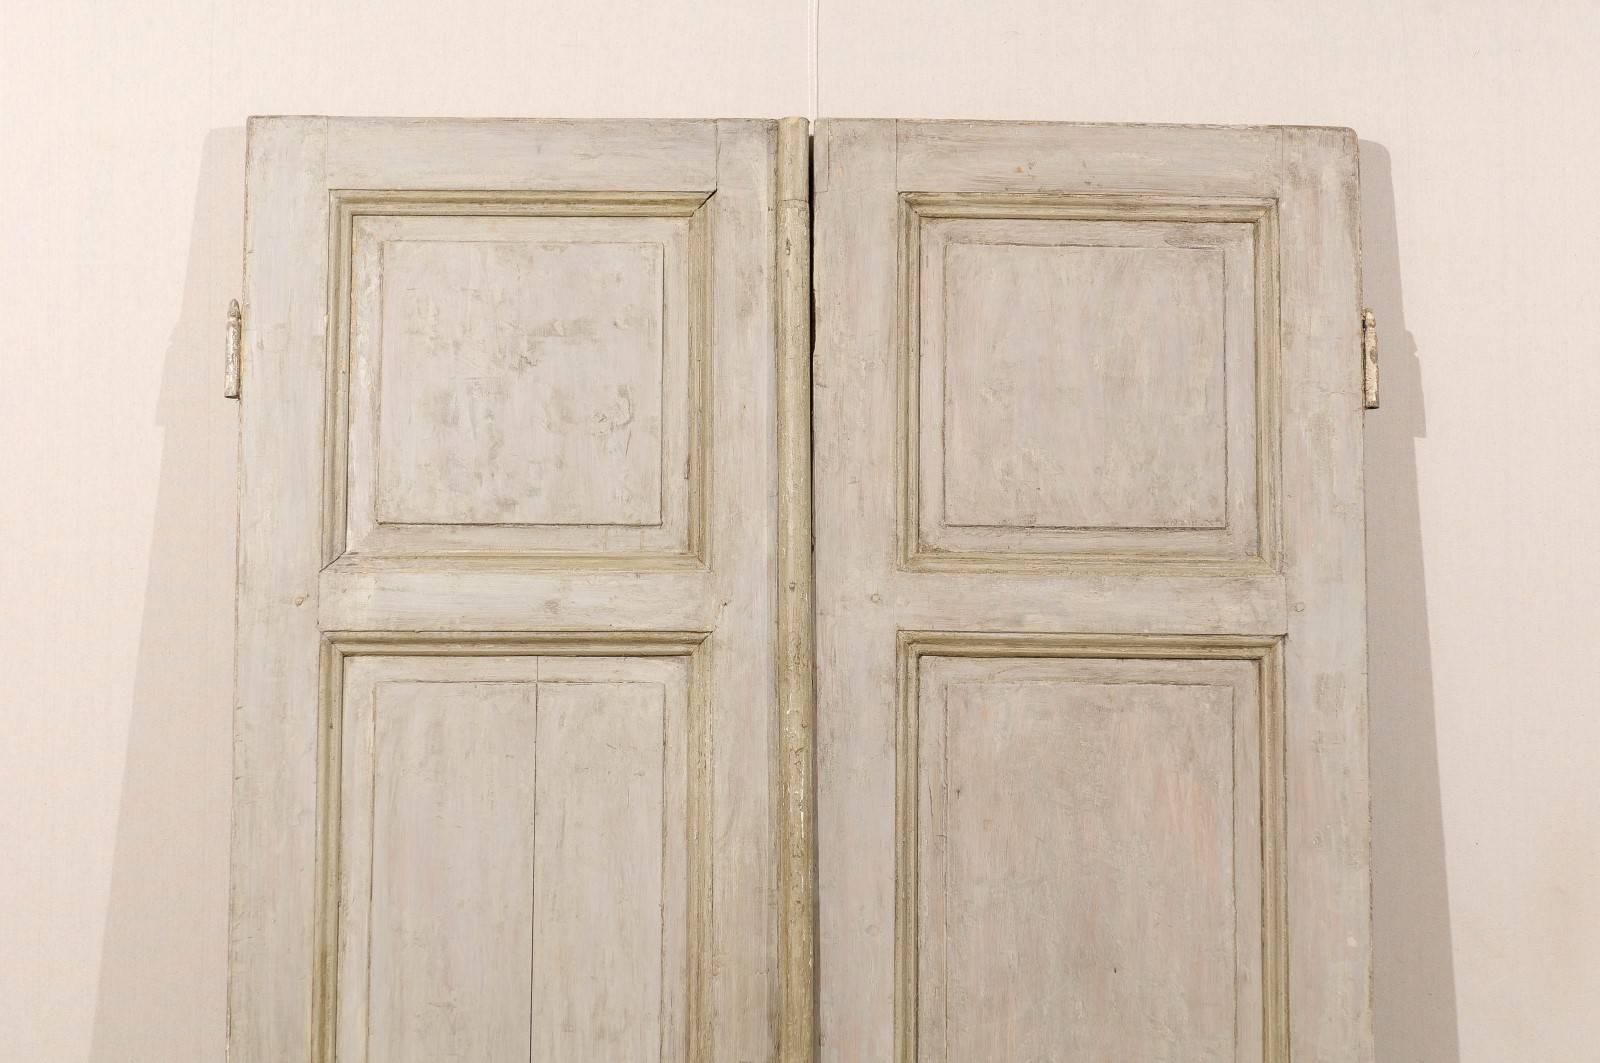 Pair of Tall French Doors from the Mid-19th Century with Grey Green Finish For Sale 1